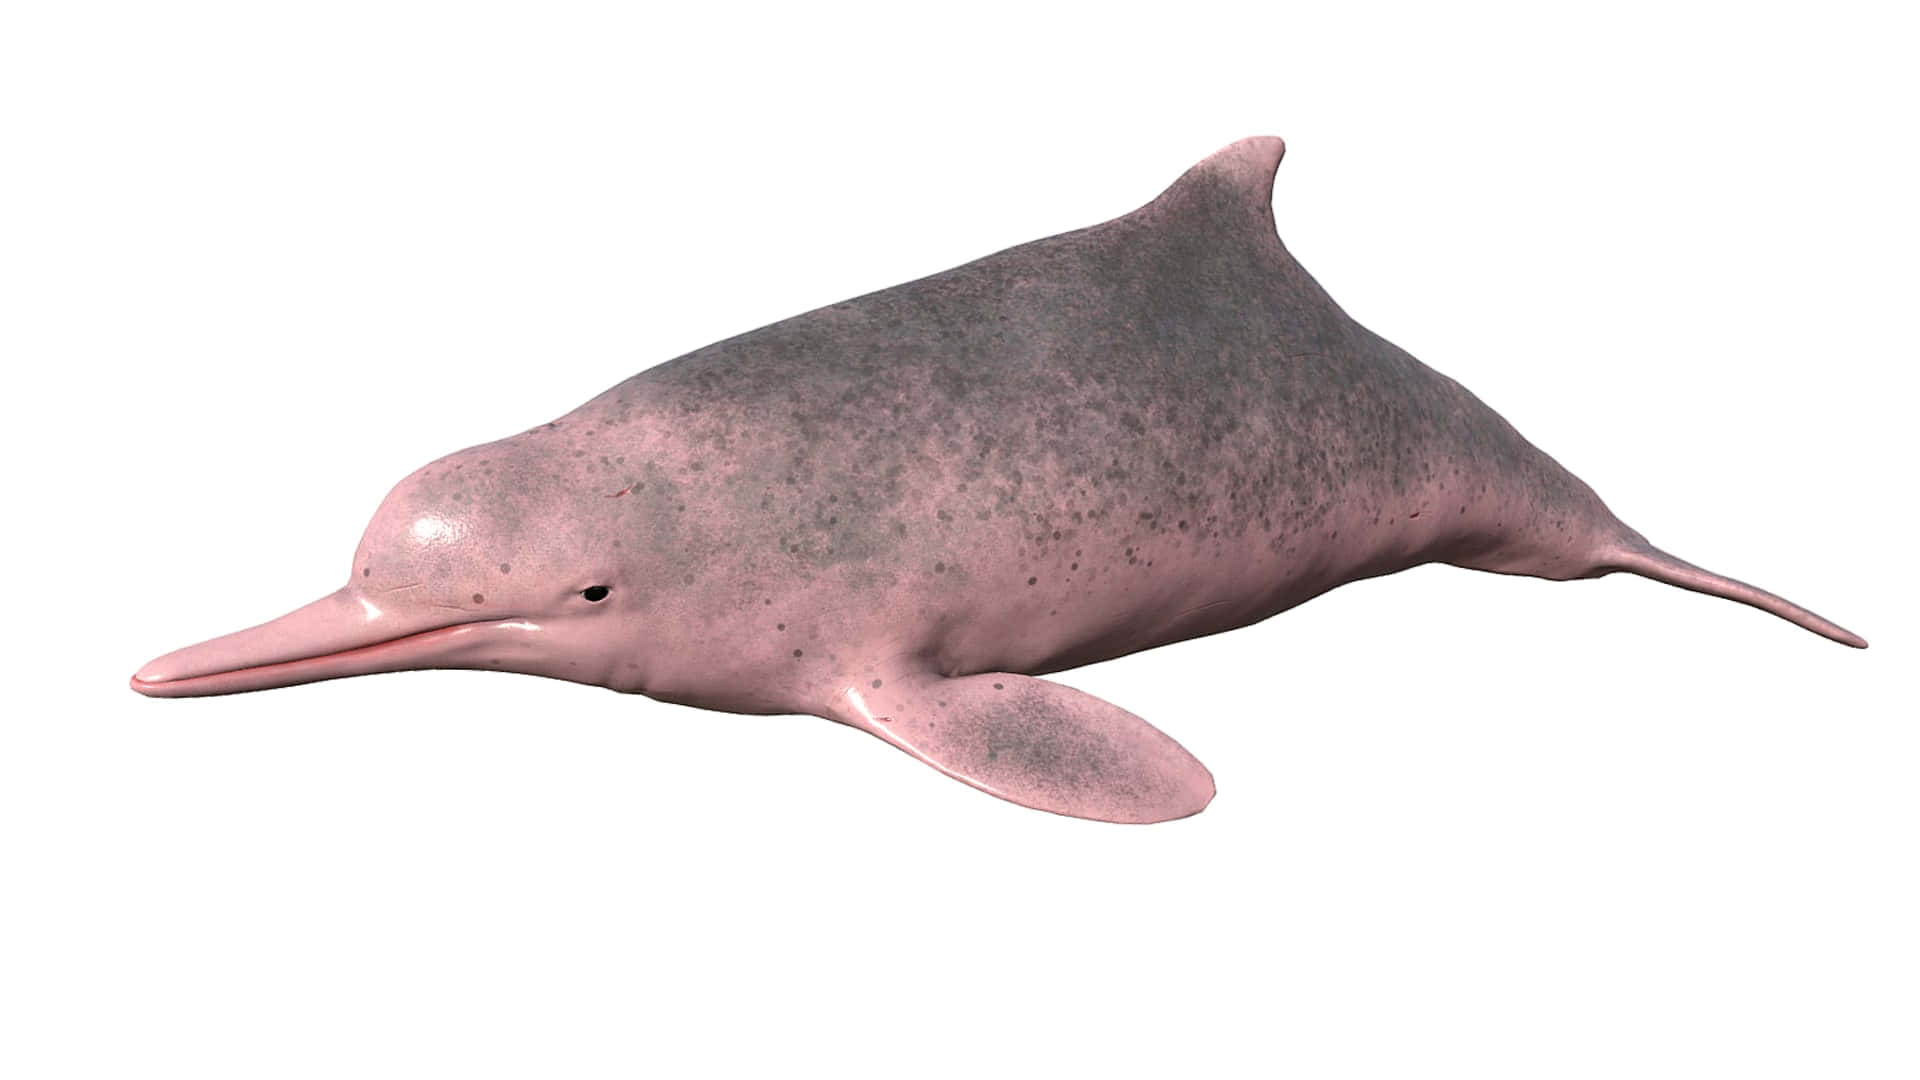 A Pink Dolphin Is Shown On A White Background